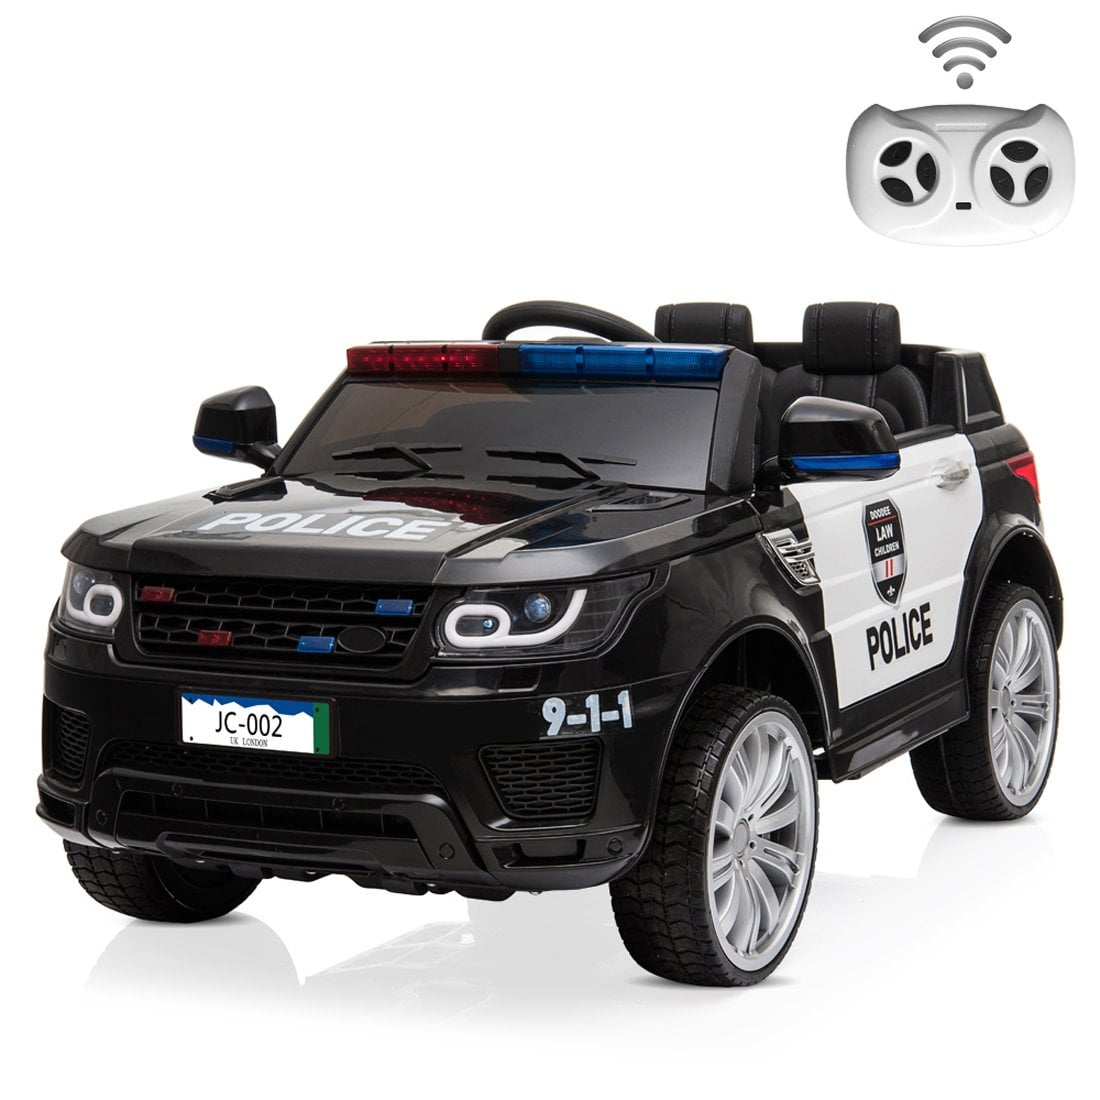 Ride on RC Toy Police Car for Kids, 12V 2.4GHz Children Dual Drive